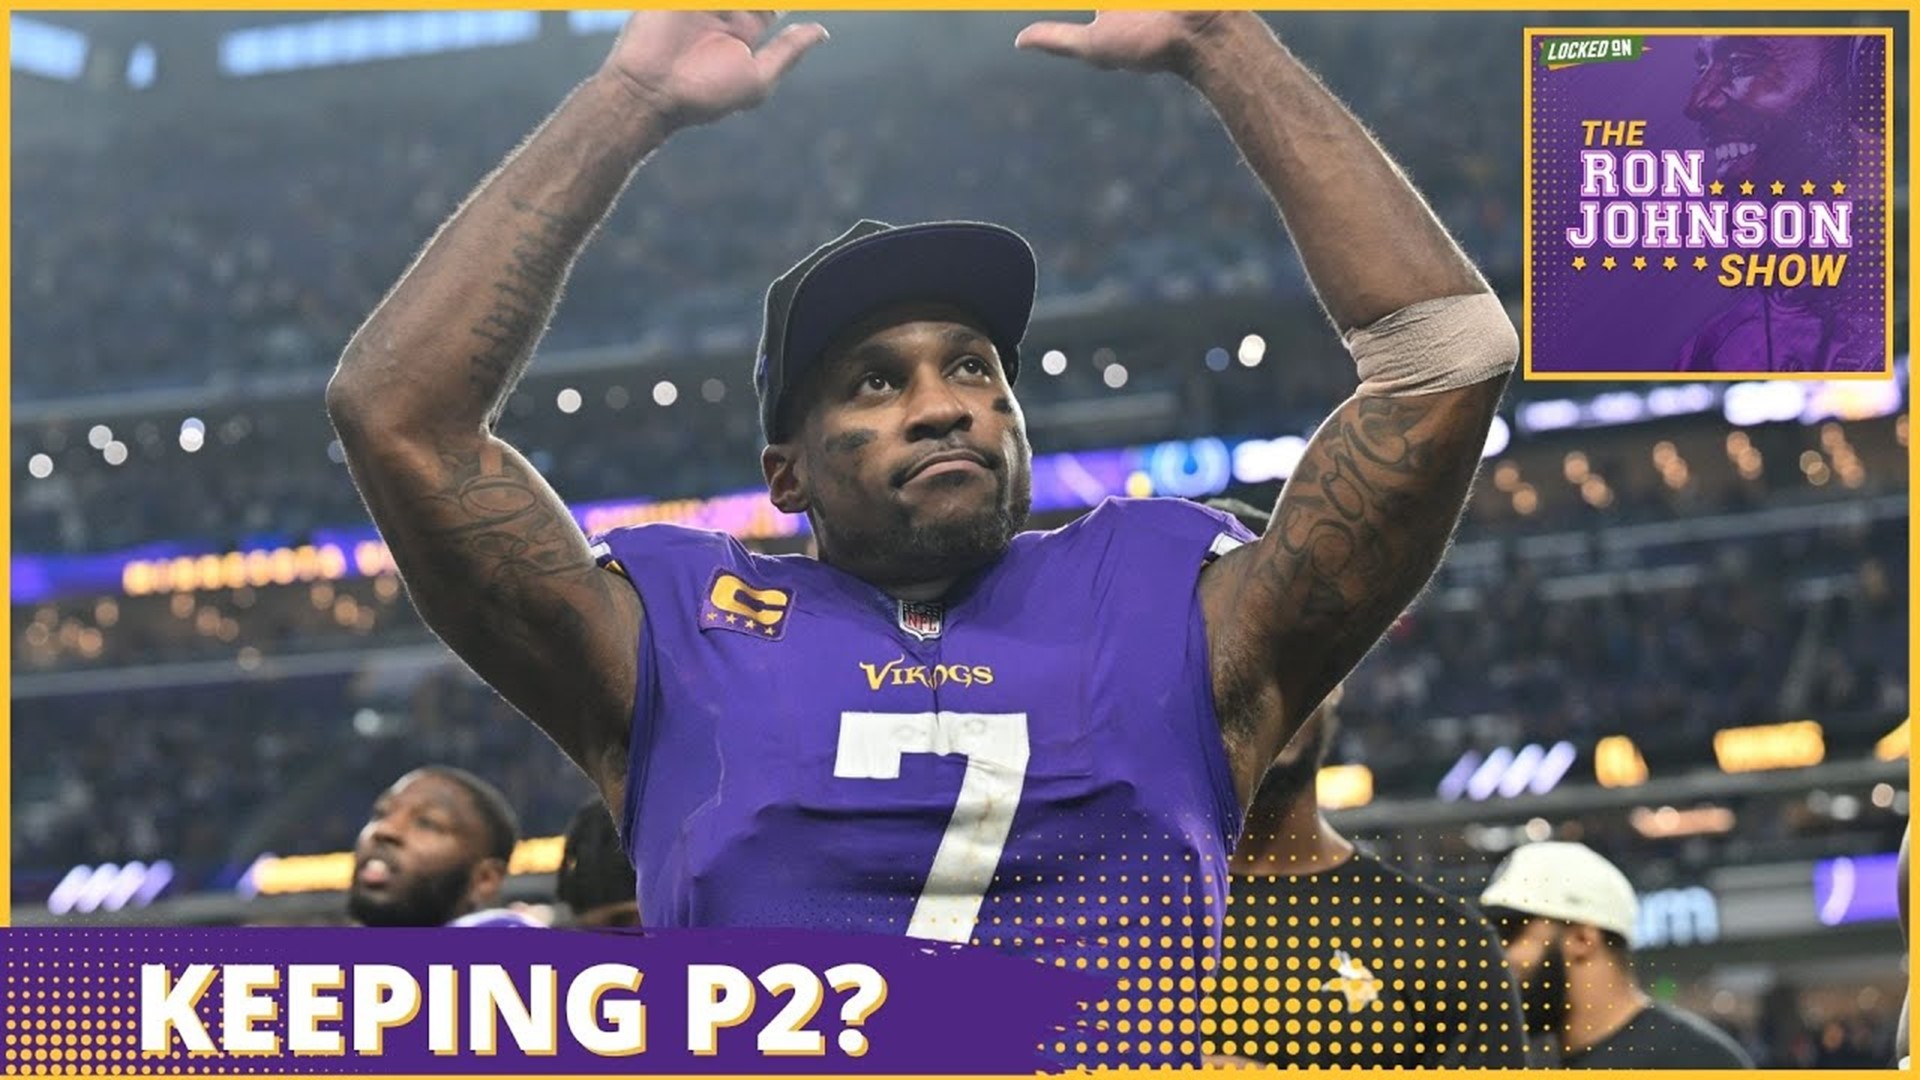 Minnesota Vikings CB Patrick Peterson is a free agent. What type of money will he cost to retain and should the Vikings keep him around?